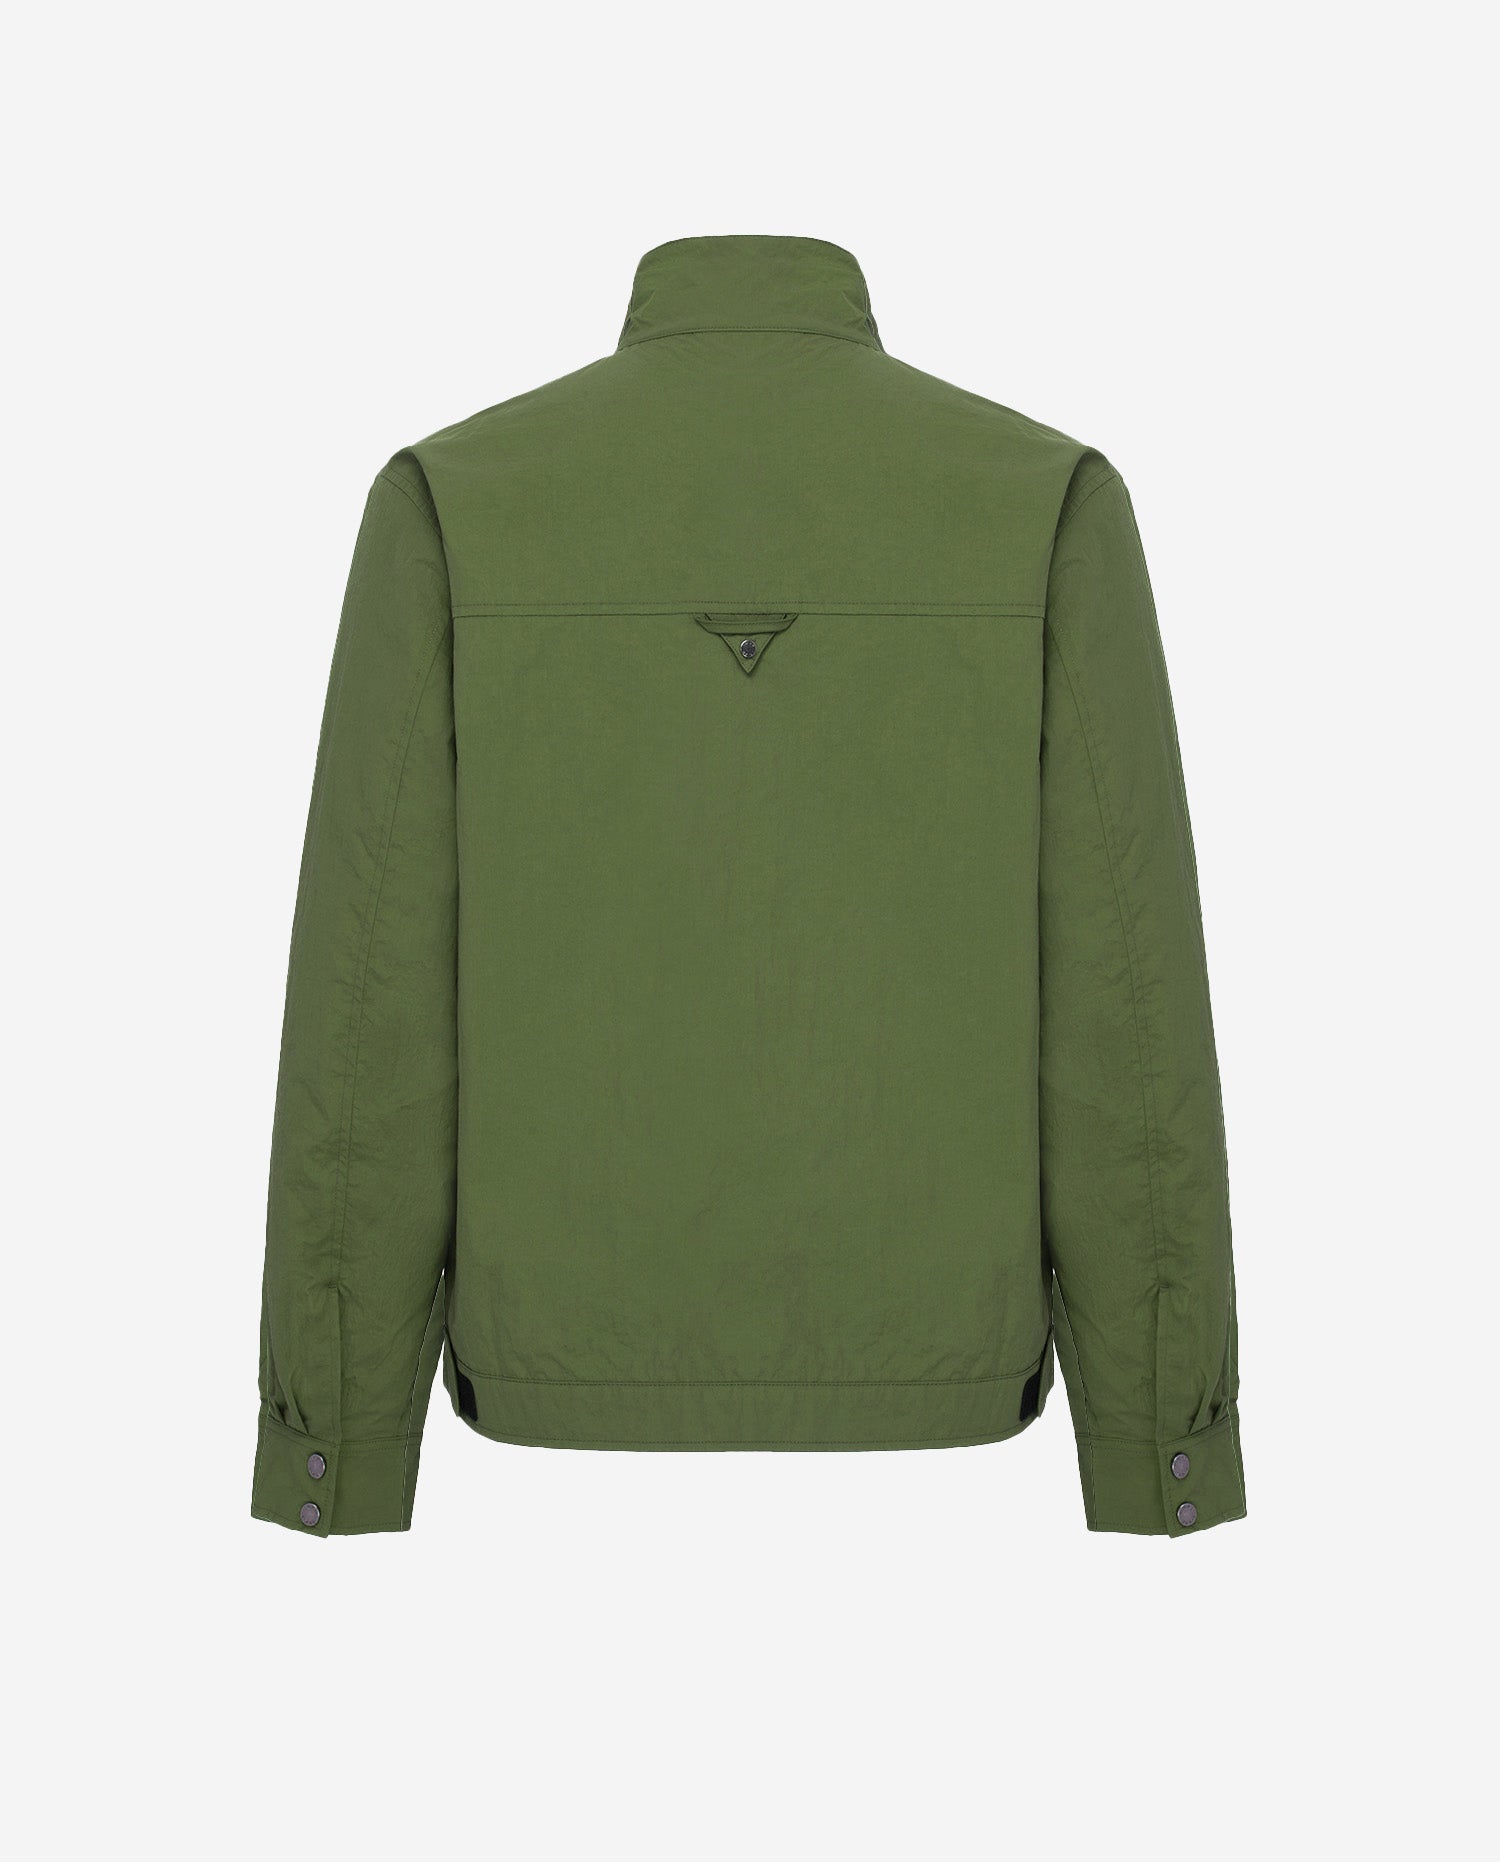 Men's Crew Jacket in Military Green 02 #military-green